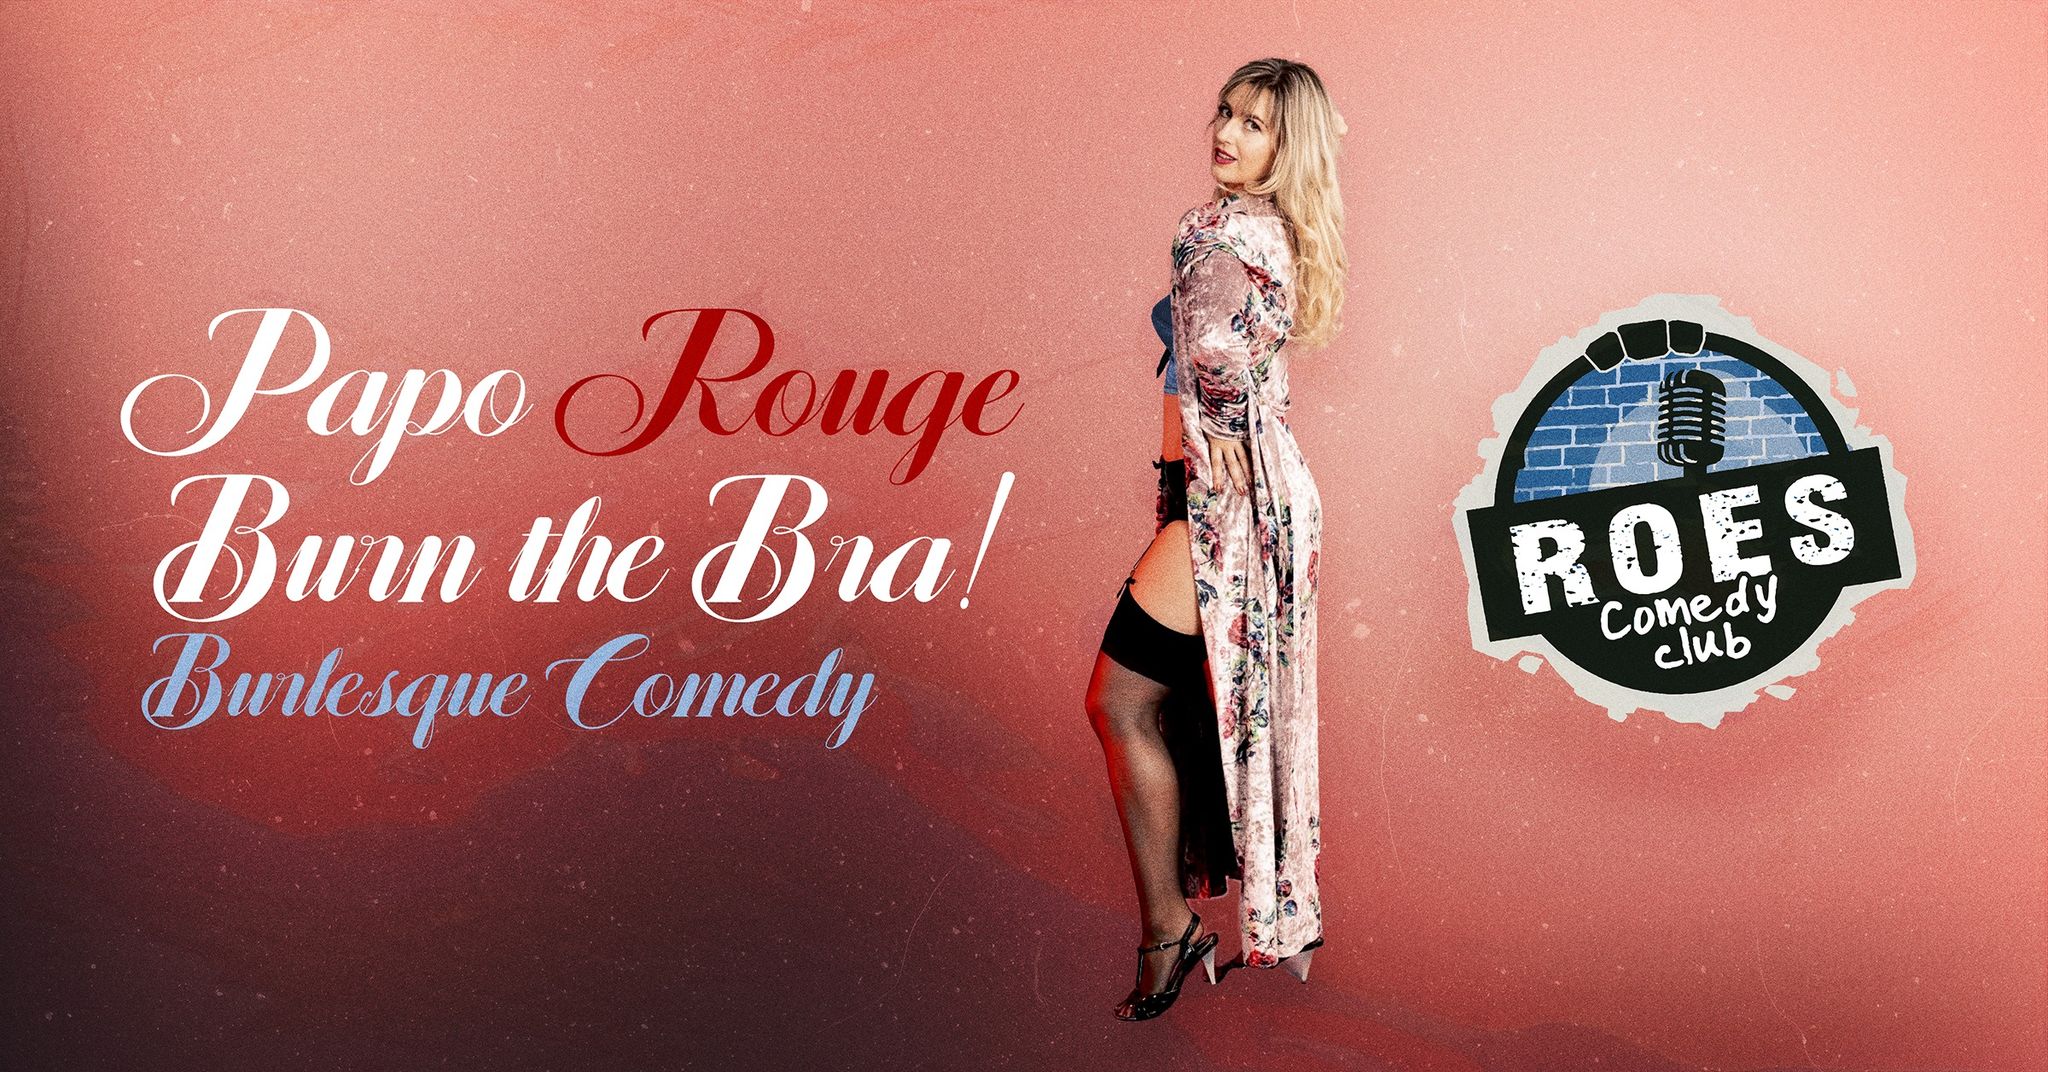 Ticket kopen voor evenement Roes Comedy Club: Papo Rouge 'Burn the Bra!' Try-out